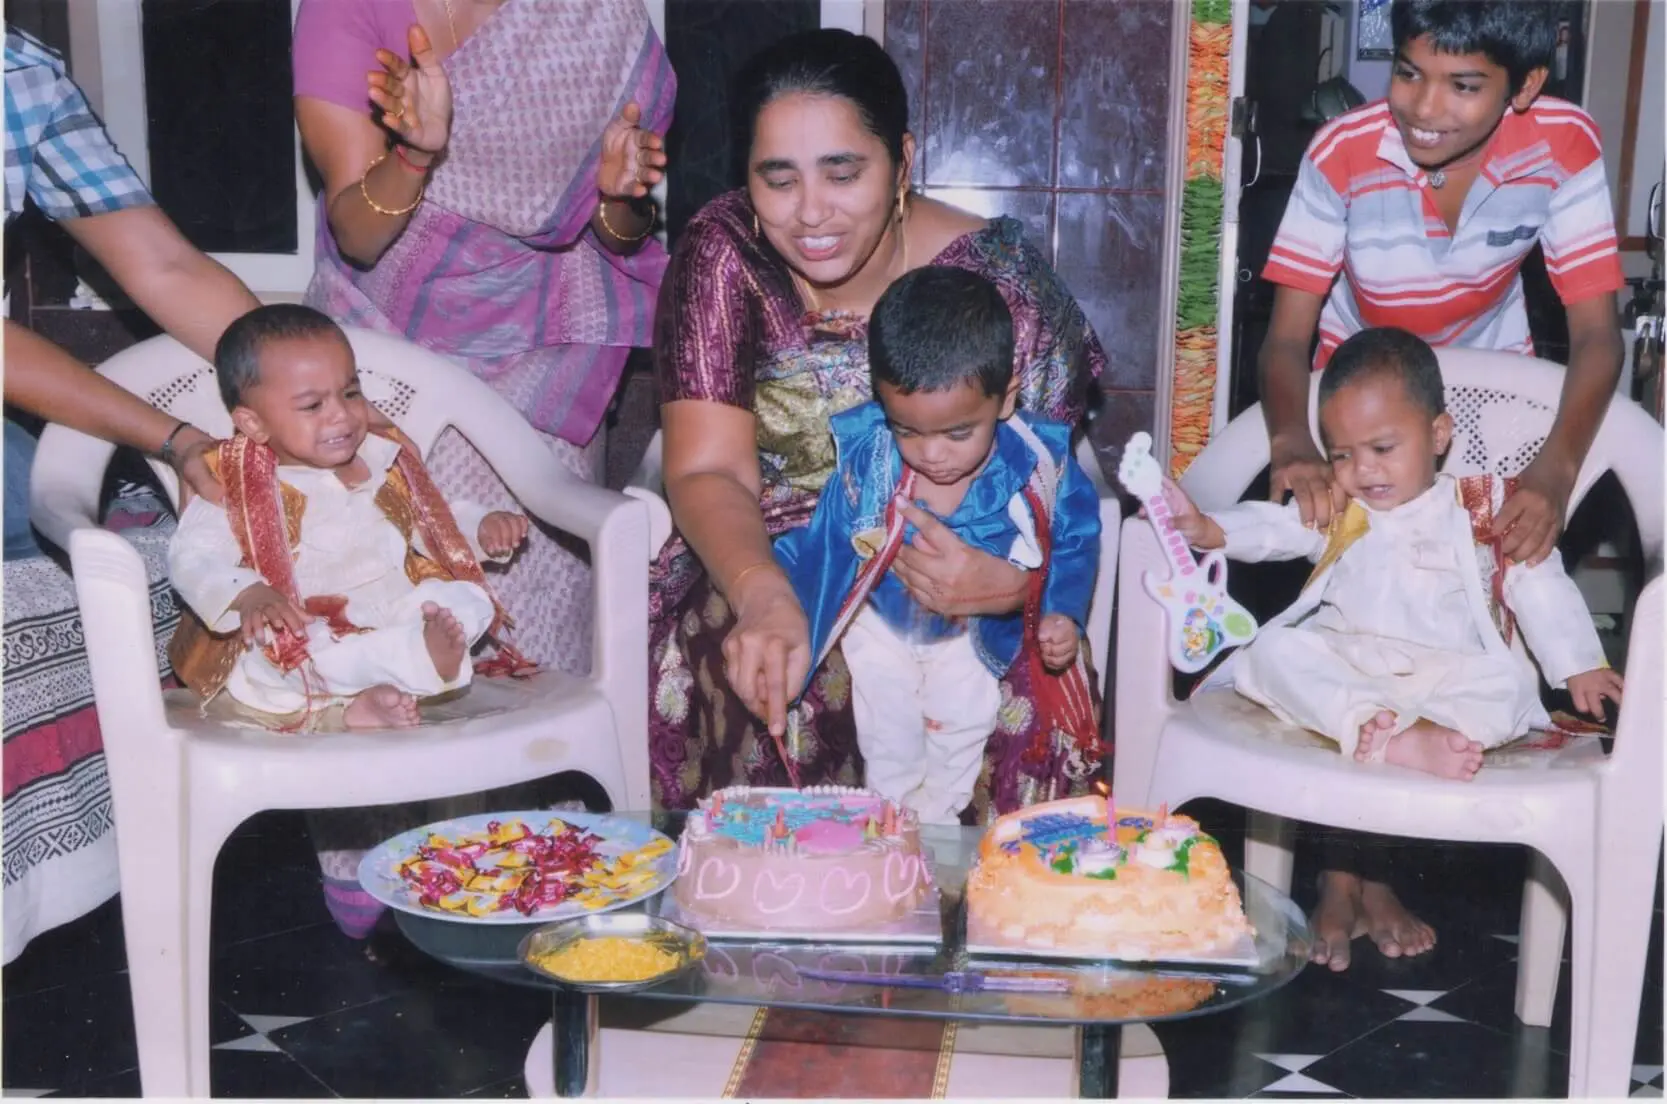 Three infants, born through ICSI at Karthika Datta's IVF clinic in 2010, seen celebrating their first birthday. Mother seated in a chair and holding one son and making him cut the cake, flanked by the other two children sitting in chairs on each side.